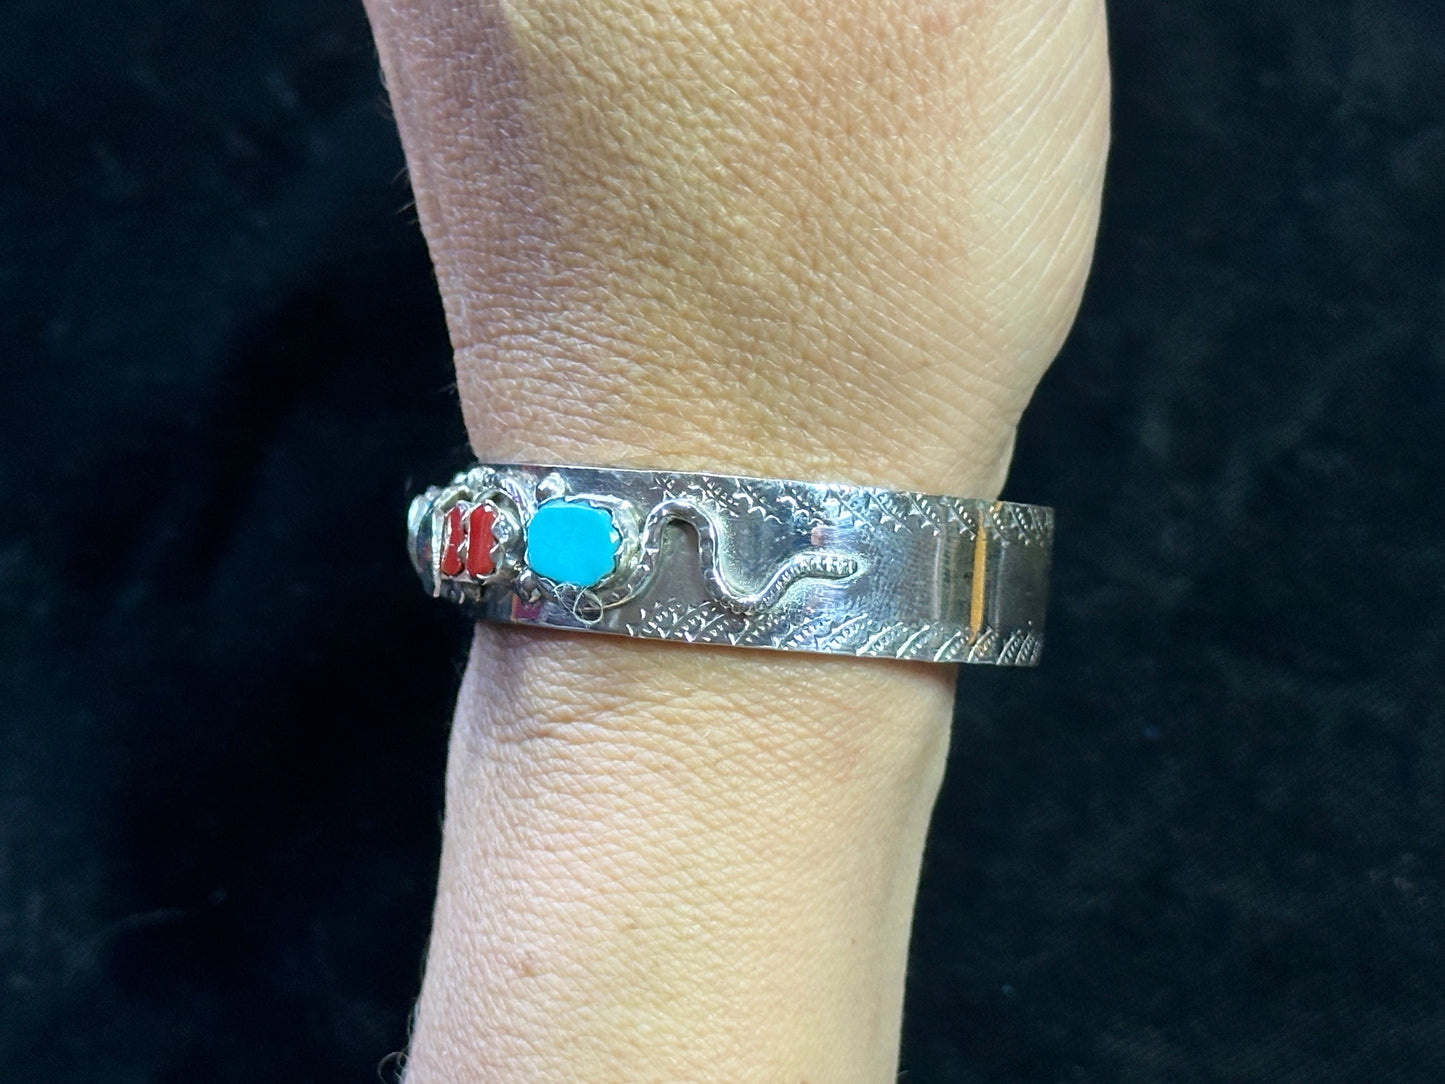 6" Snake Design Cuff with Turquoise and Coral Stones by Joy Calavaza, Zuni